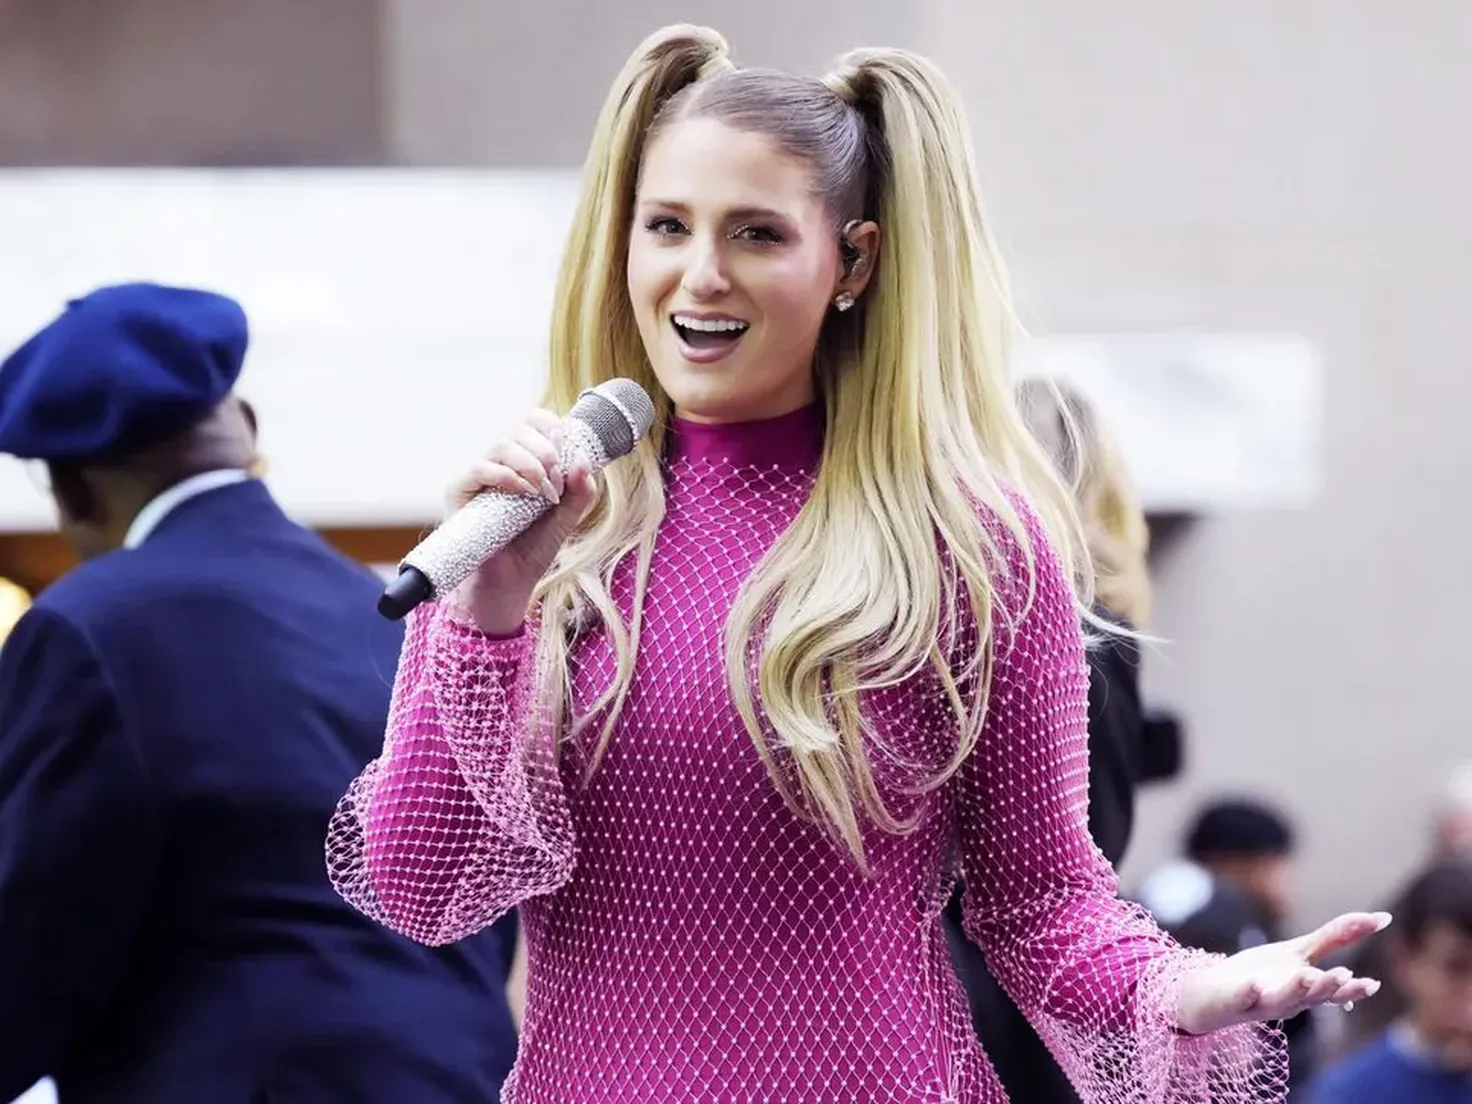 Meghan Trainor's Mother Ranks As Pop Radio's Most Added Song